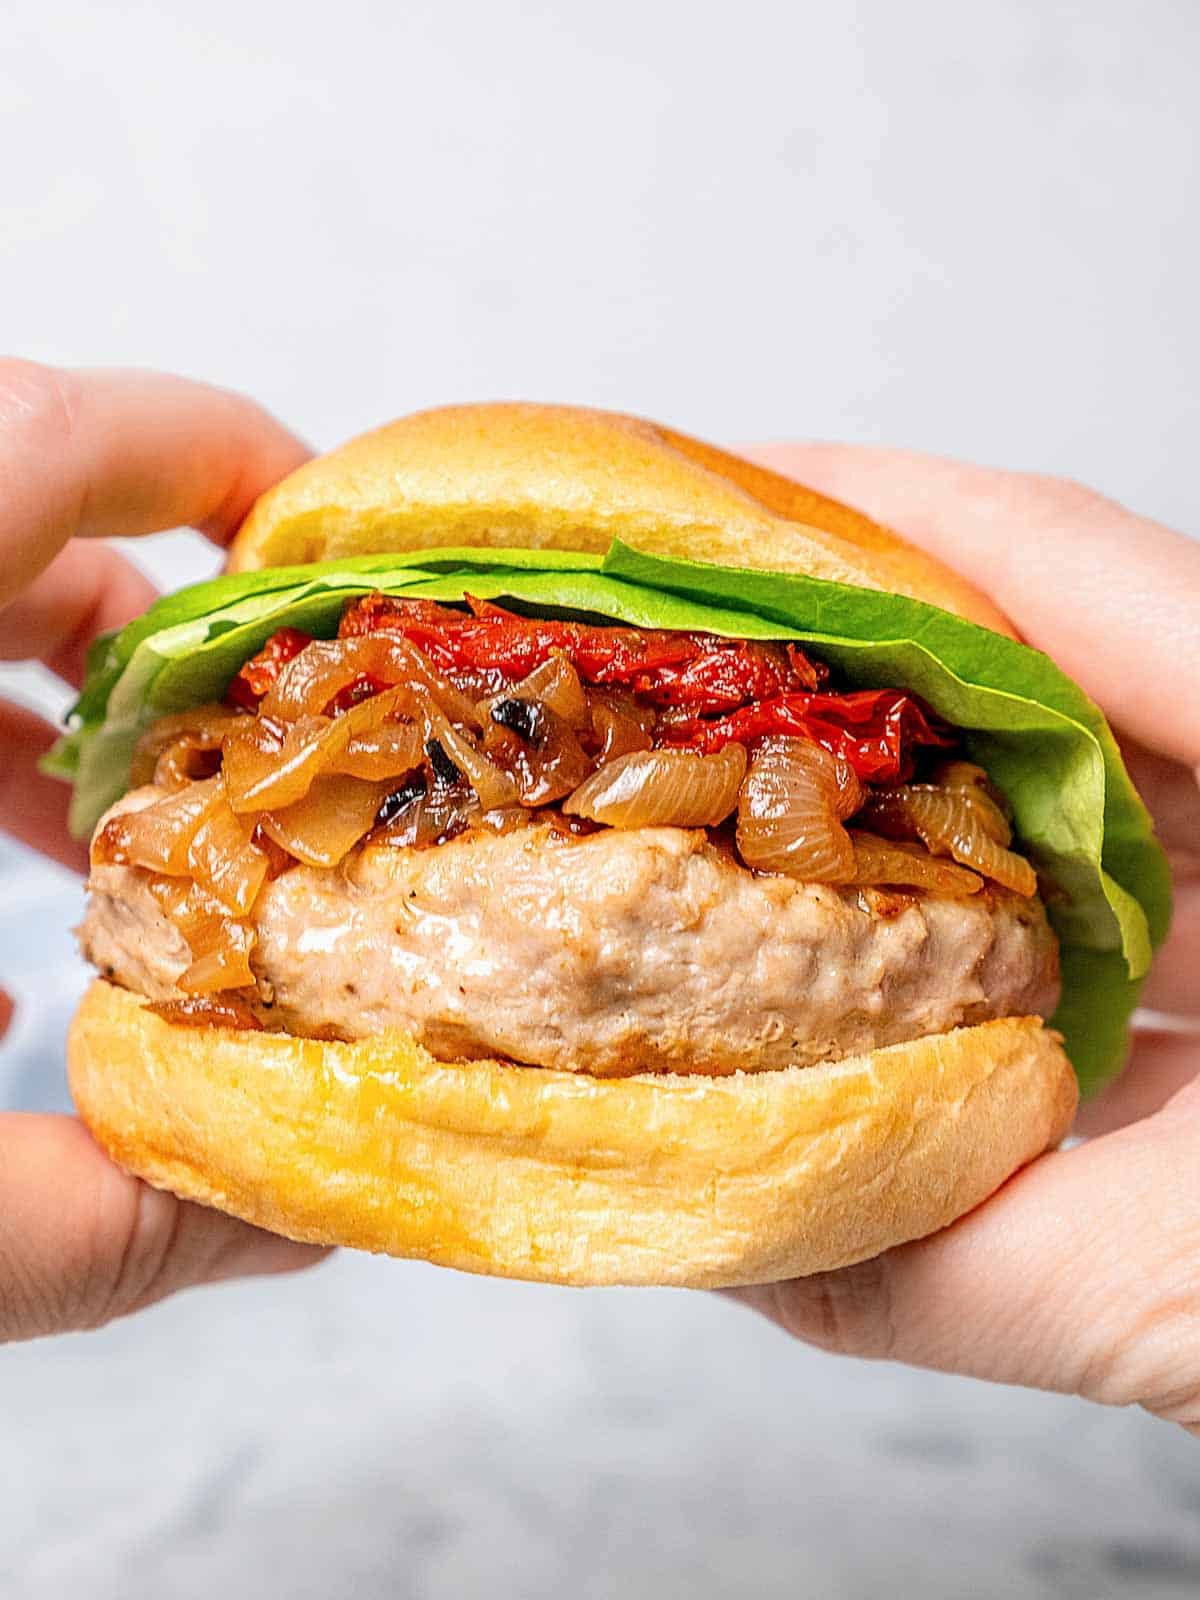 holding turkey burger with toppings and brioche bun.